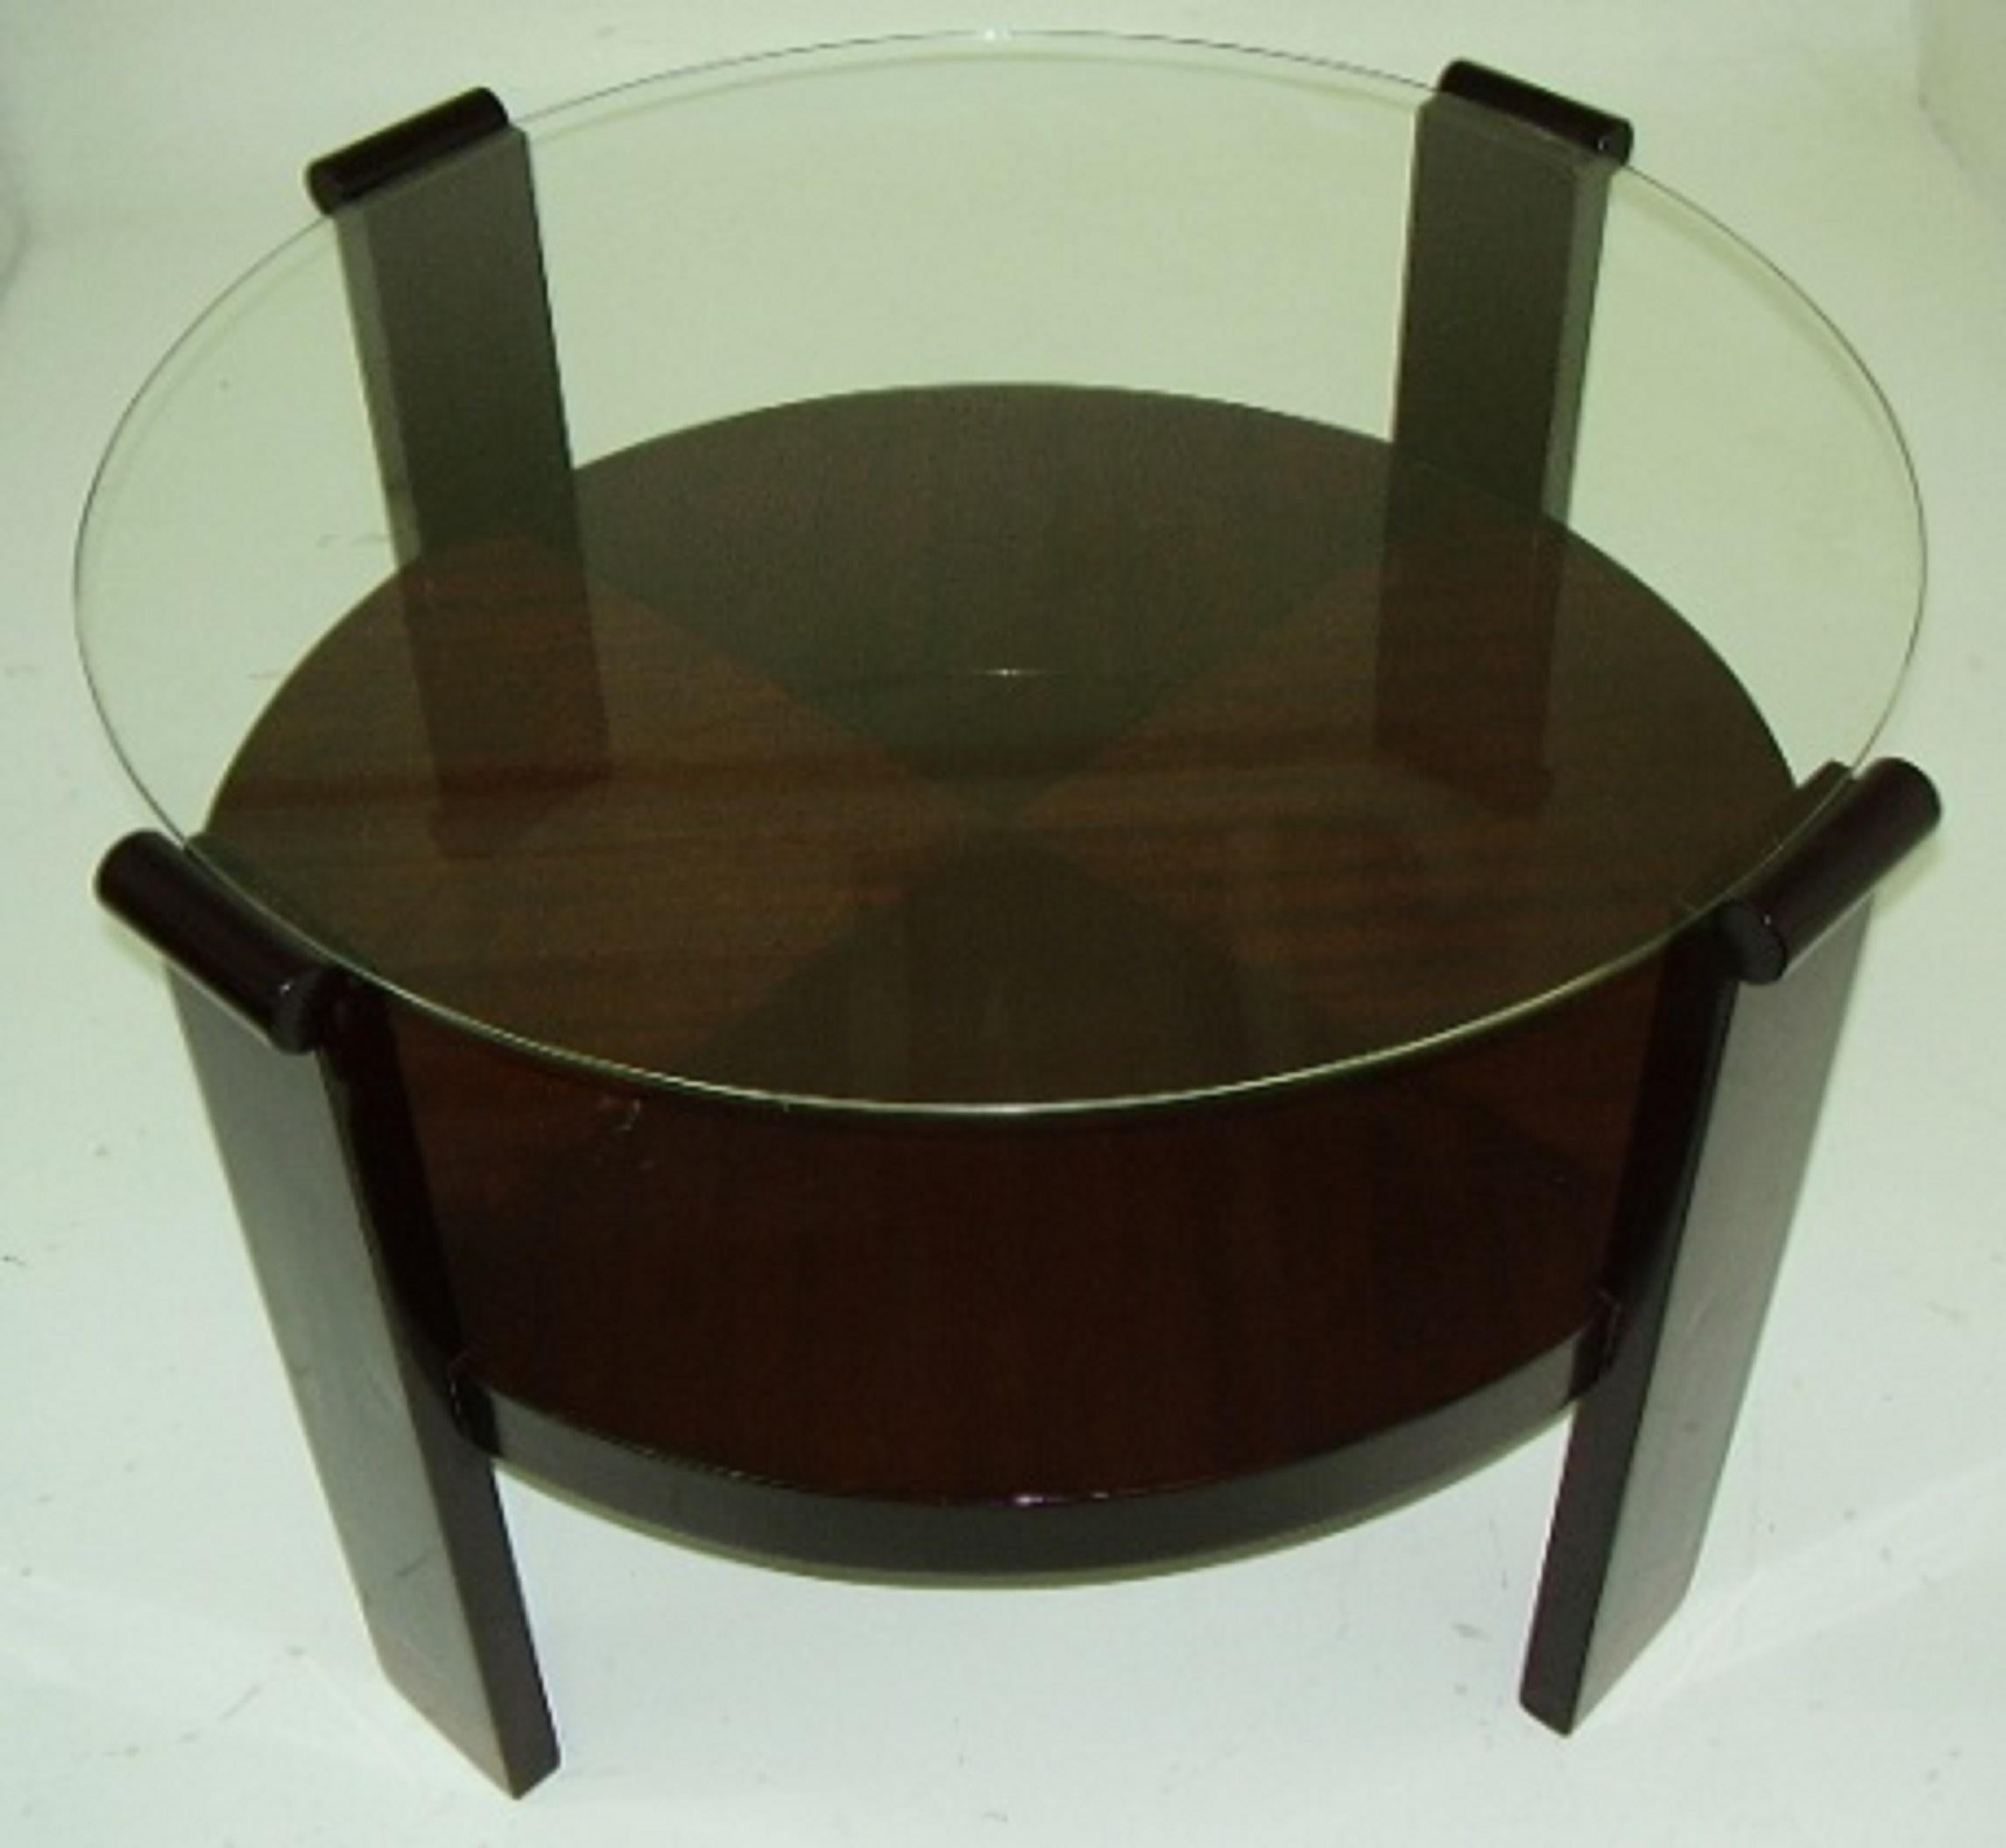 France Table

Material: Wood and glass
Style: Art Deco
We have specialized in the sale of Art Deco and Art Nouveau and Vintage styles since 1982. If you have any questions we are at your disposal.
Pushing the button that reads 'View All From